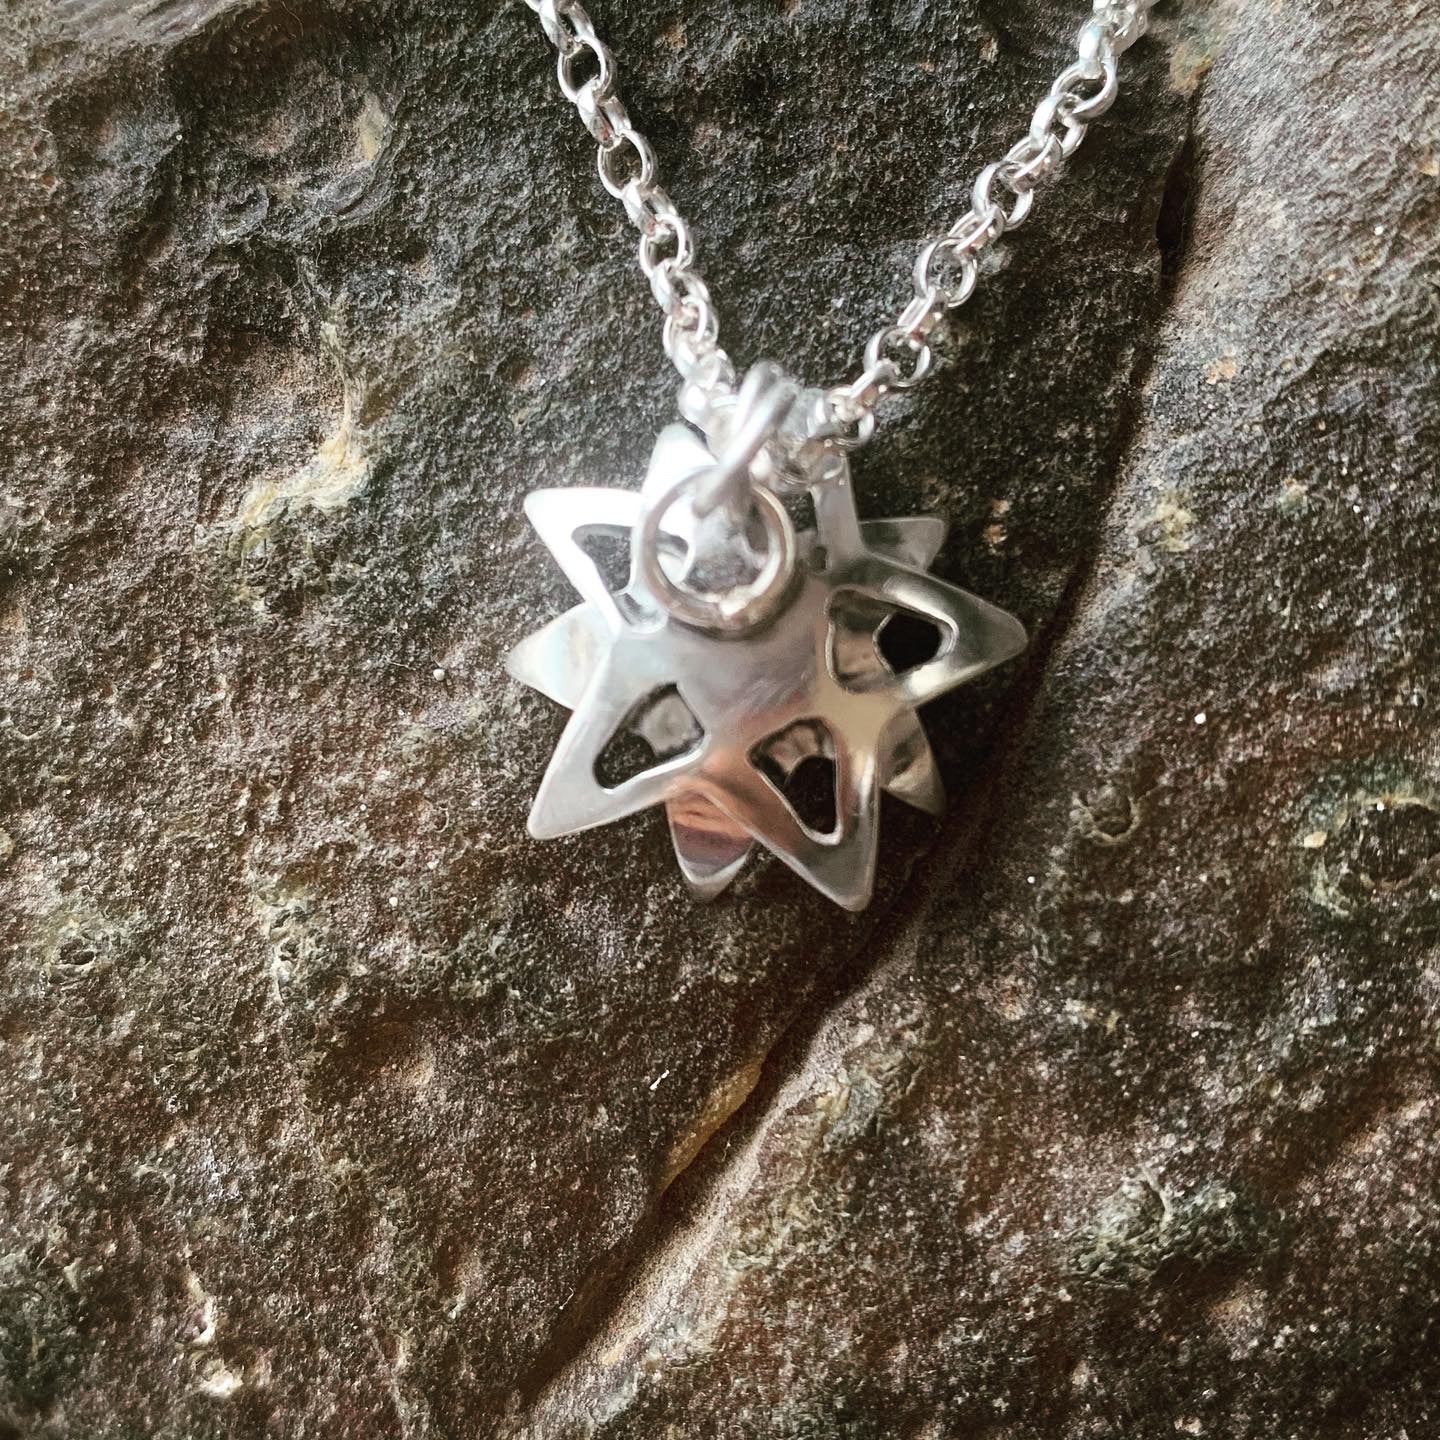 Sterling silver and Australian Opal flower pendant necklace